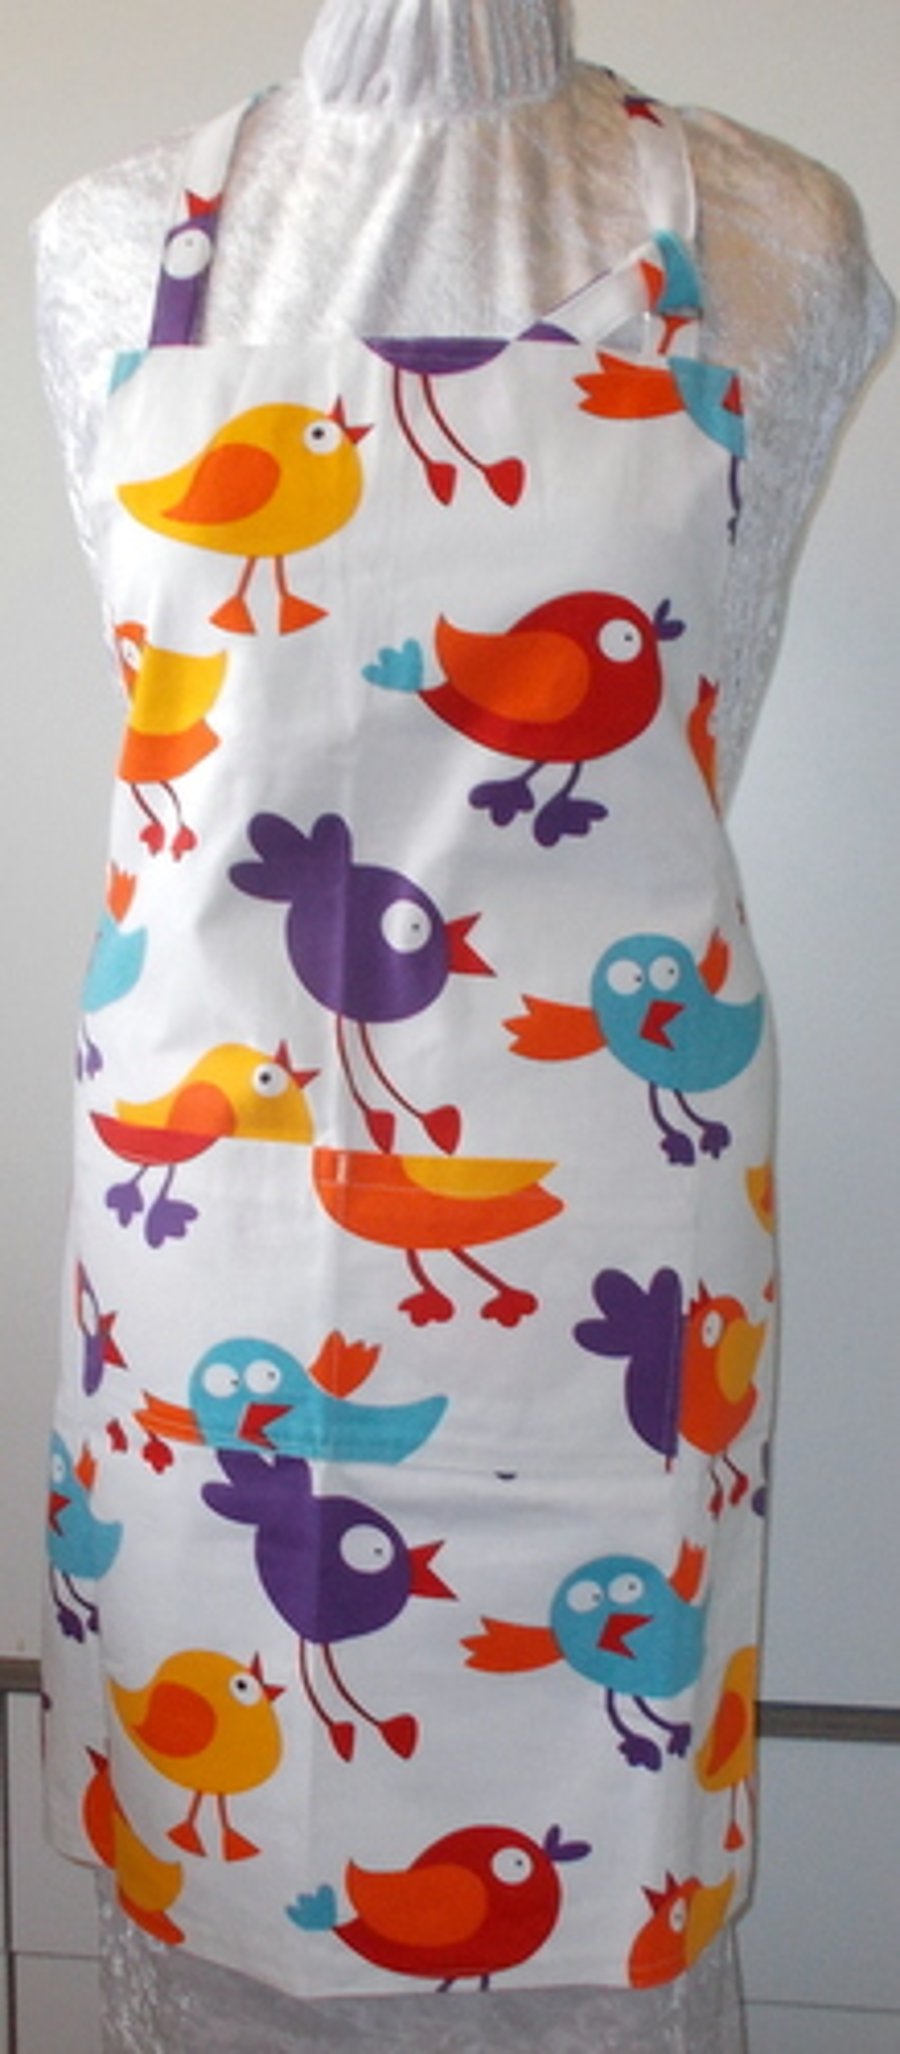 Hand made full apron with fun chicken print